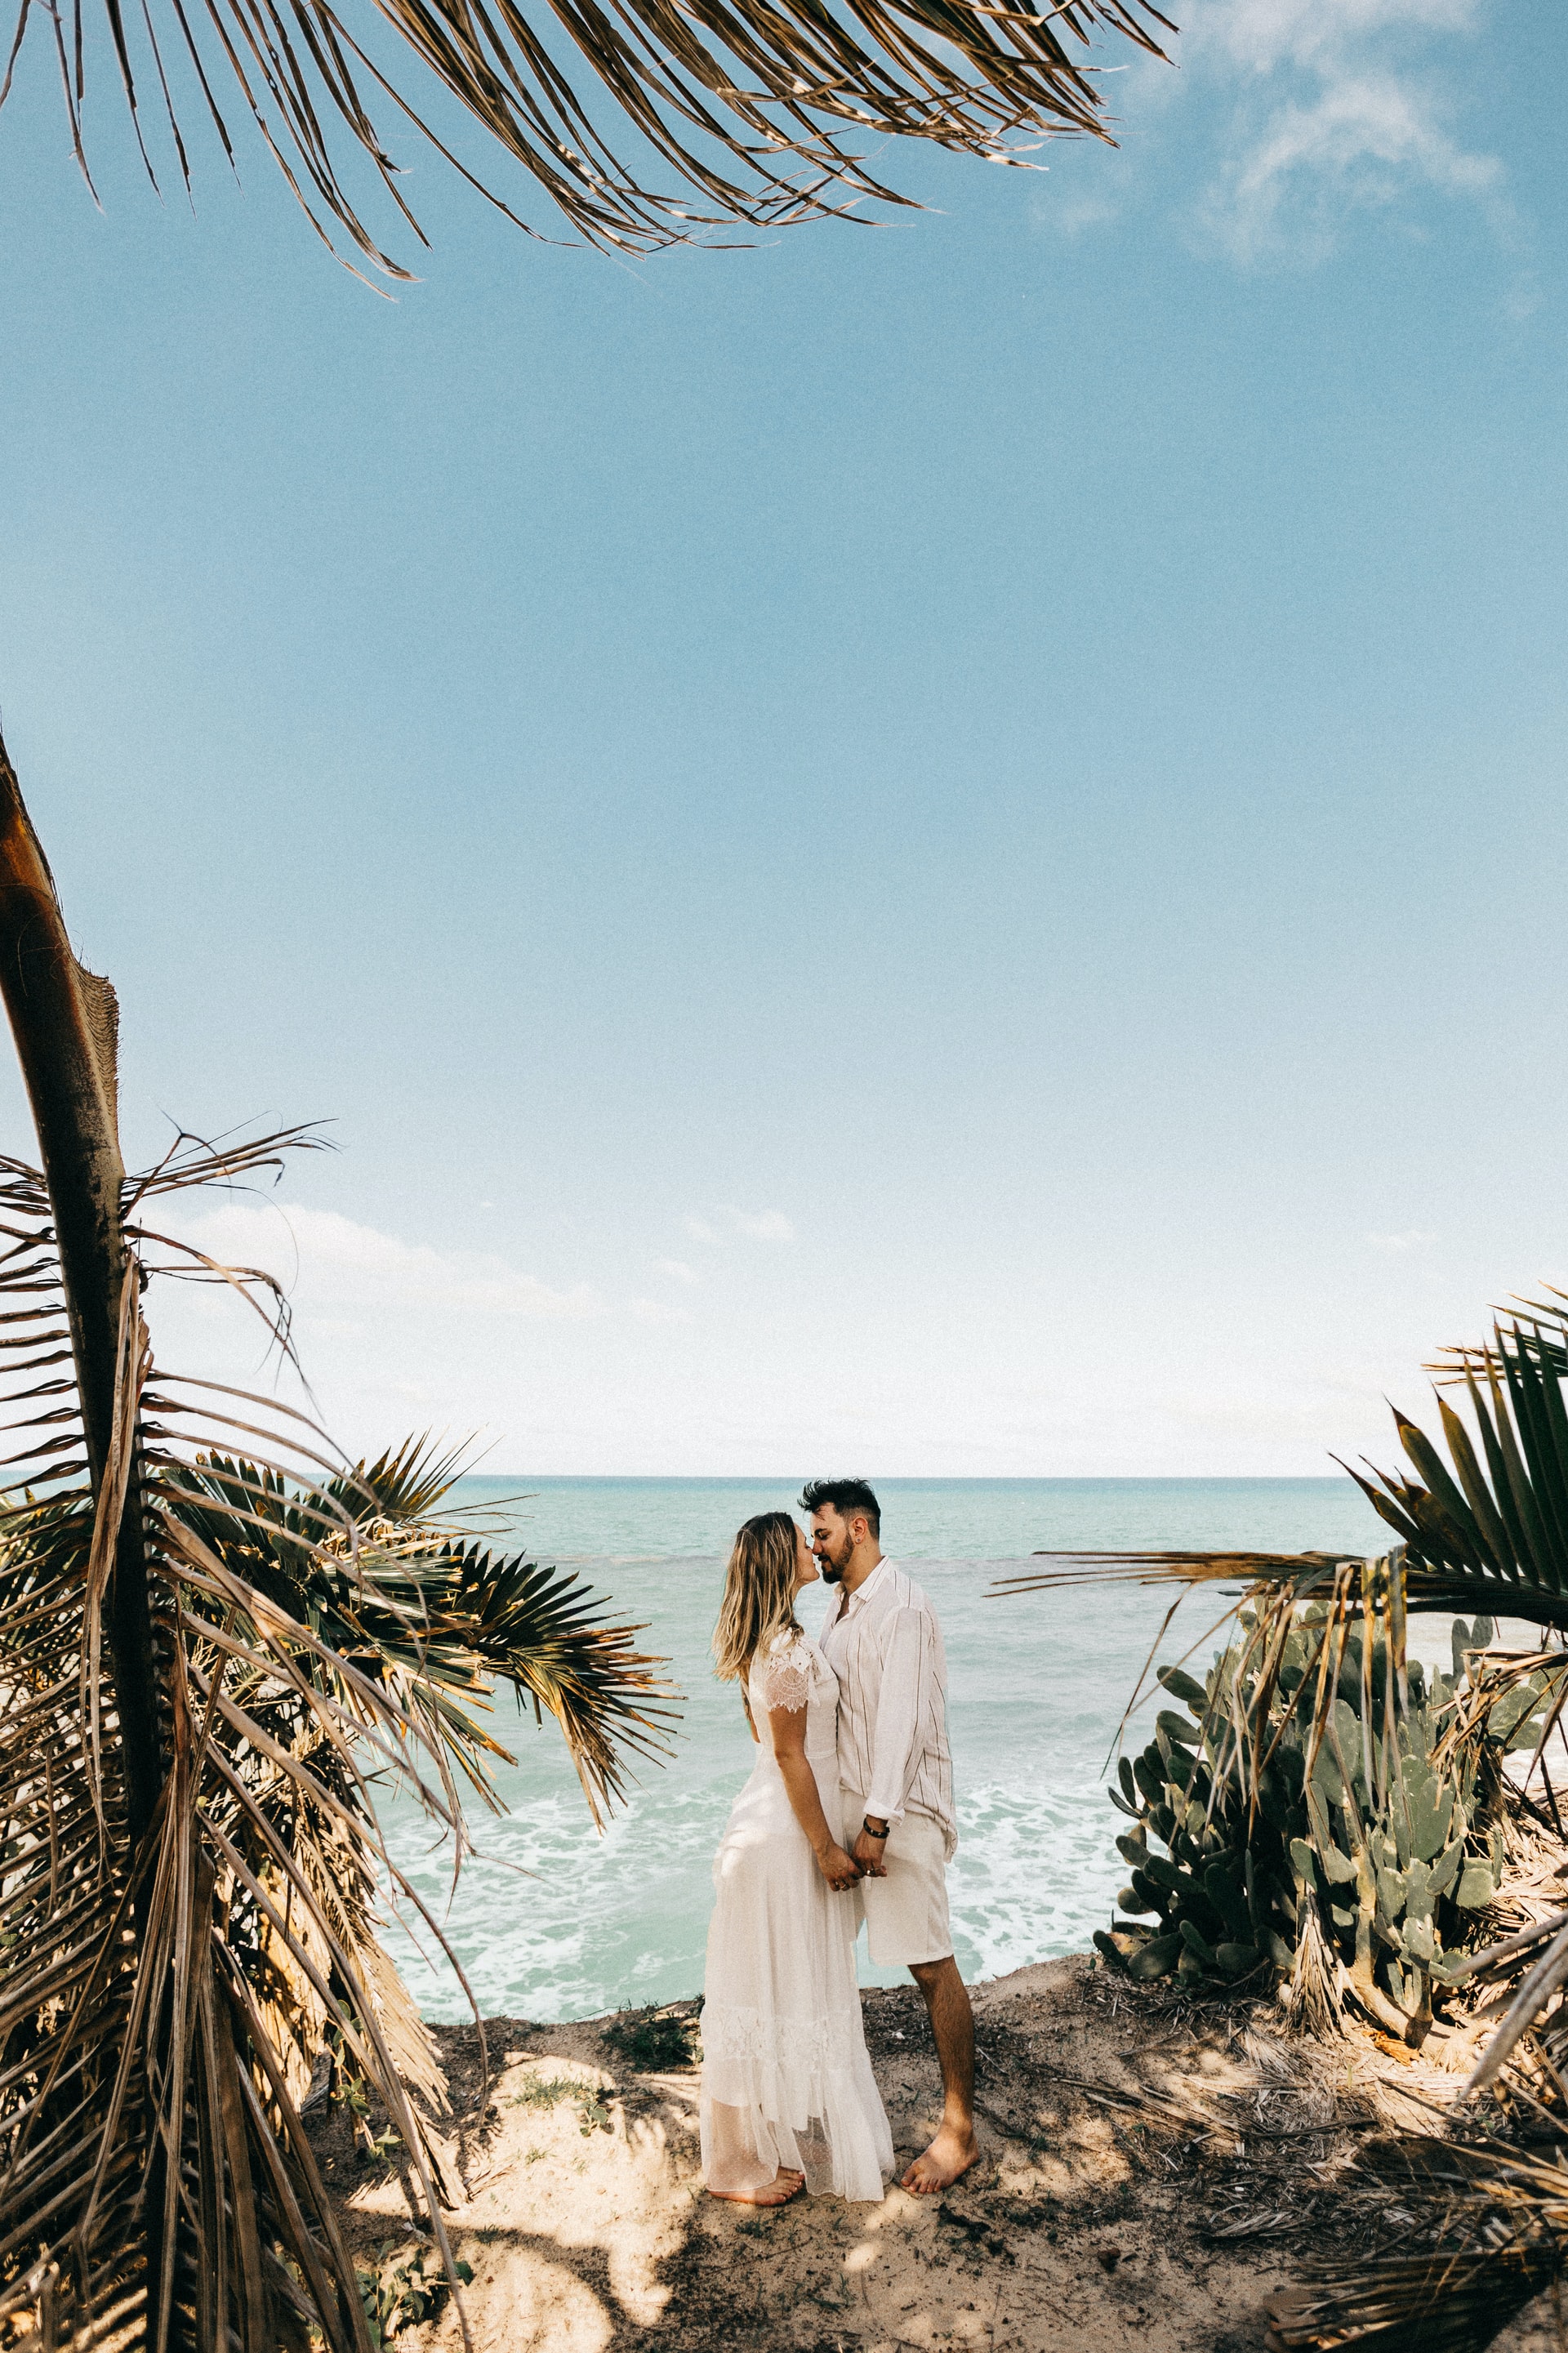 How Much Does a Beach Wedding Cost?